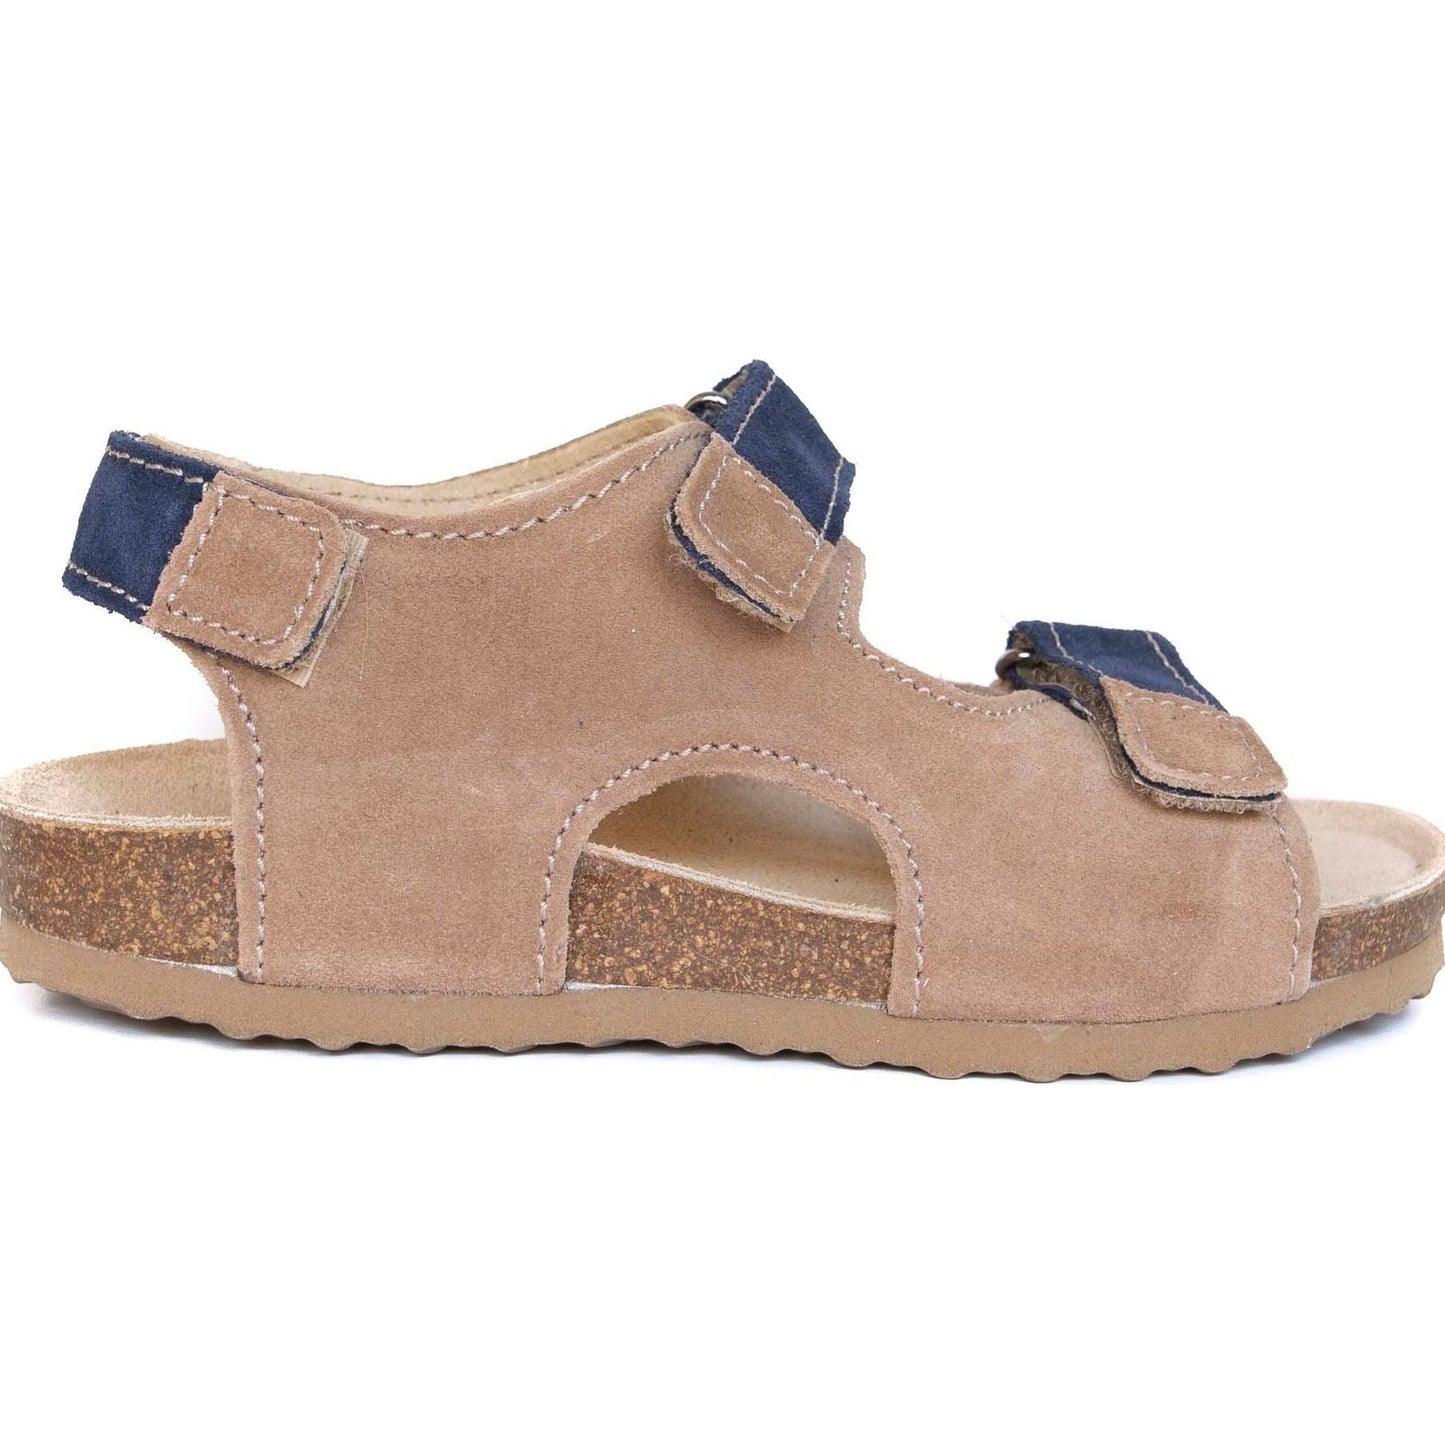 orthopedic older boys sandals  with open heel: T27: color brown - feelgoodshoes.ae